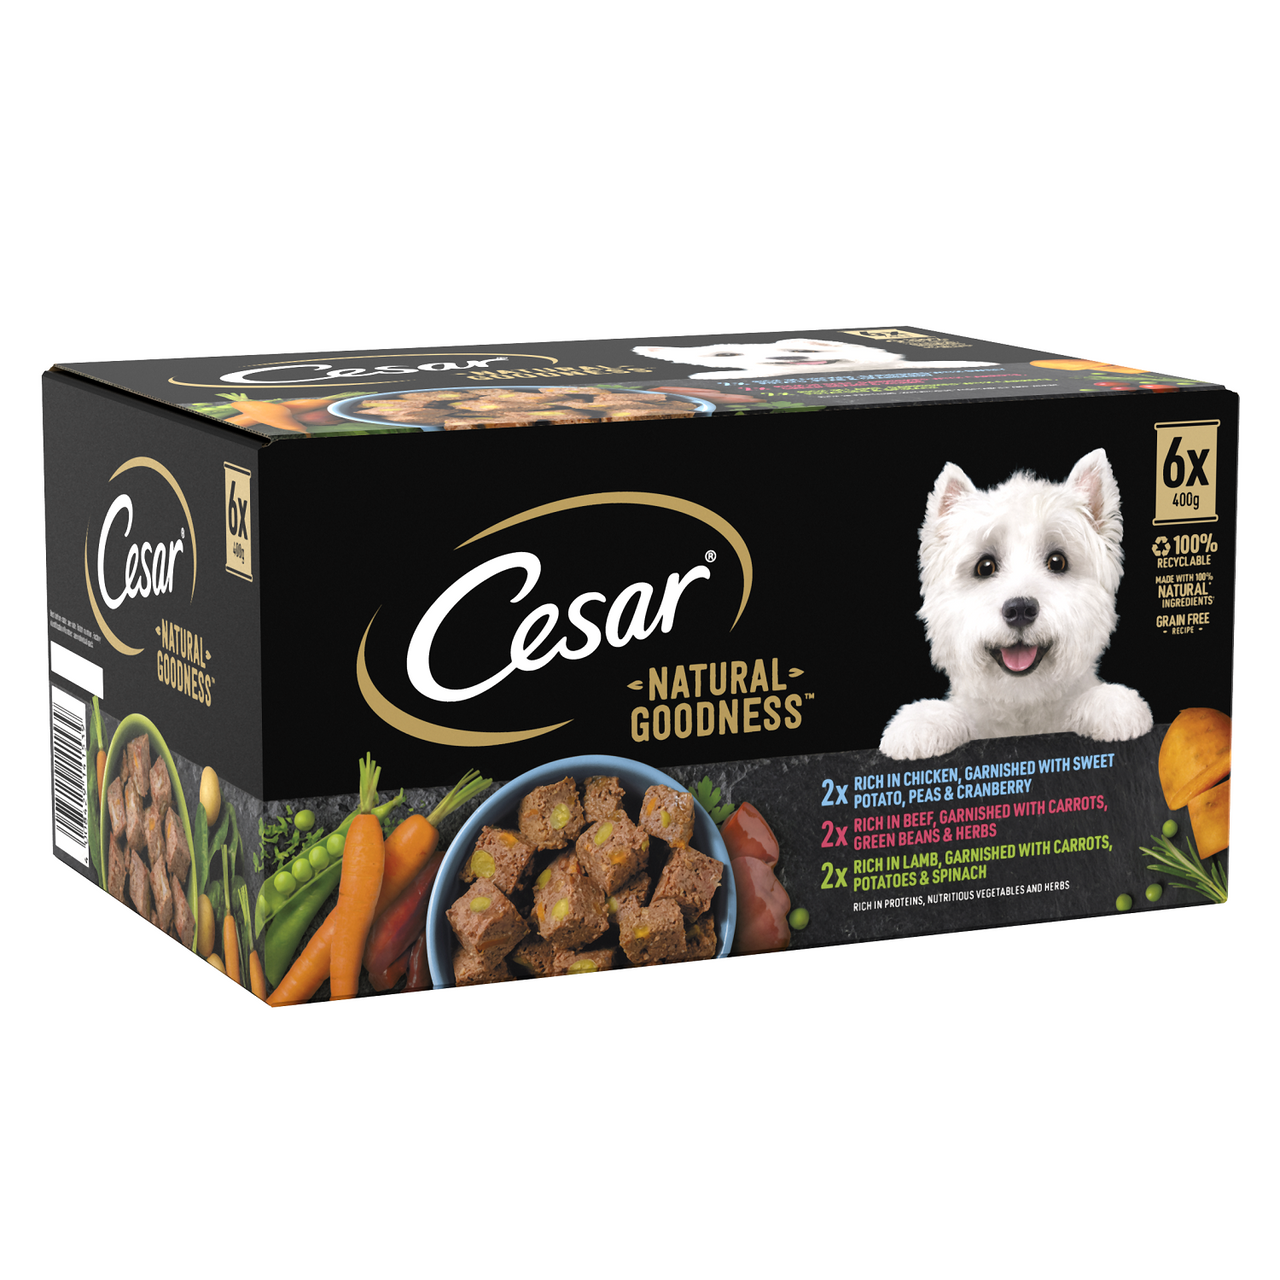 Cesar 6x400g Natural Goodness Mixed Selection in Loaf Tins - Adult Wet Dog Food